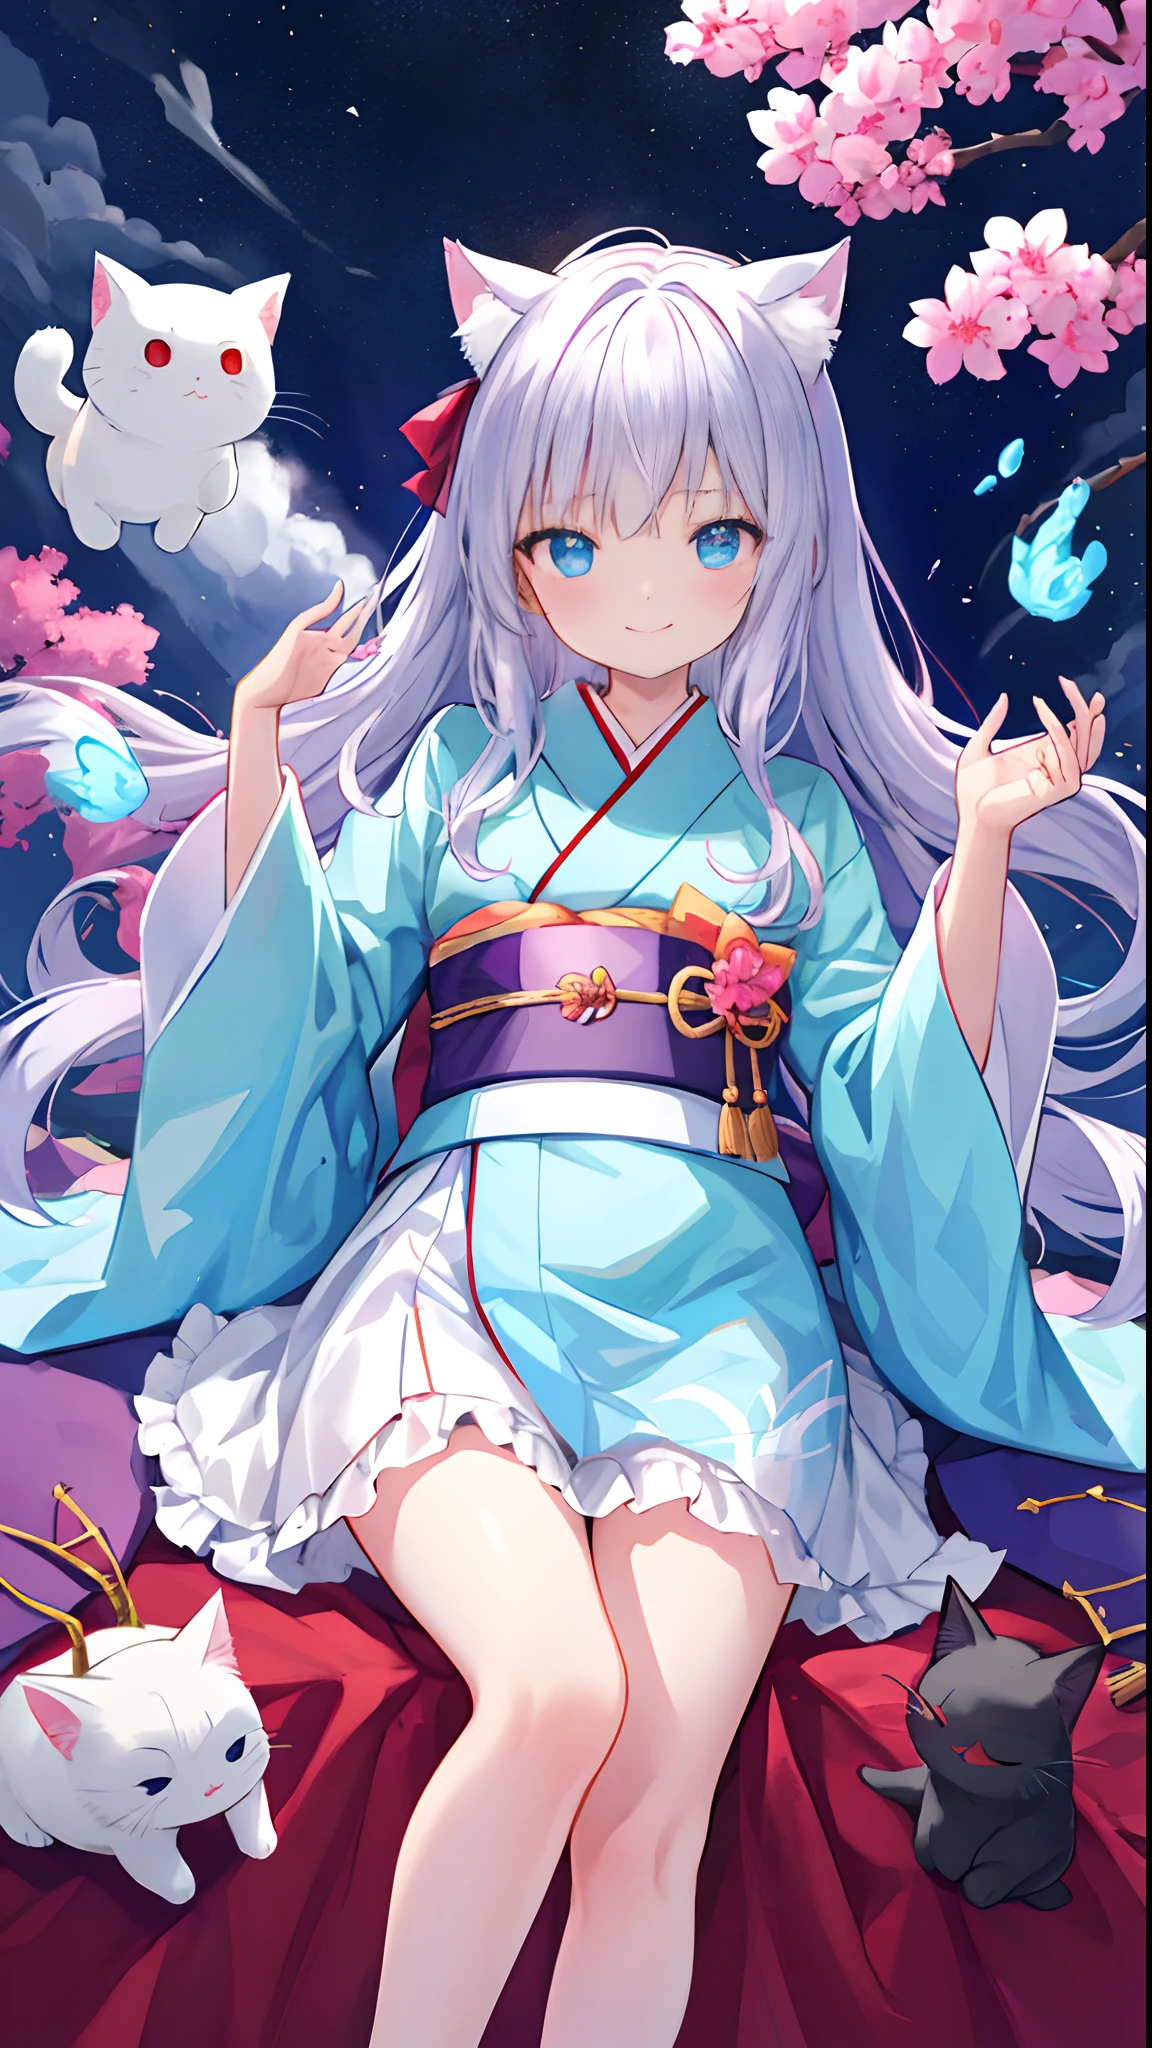 Beautiful illustration、top-quality、Cute  s、、PastelColors、fluffy cat ears、Petite、Silver long hair、Stuffed cat、Bright lighting、bright light blue eyes、​masterpiece+++、top-quality++、4K+++、8k+++、Beautiful fece、cute little++、cute  face+++、evil smile++、Light smile、Beautiful Landscapes++、Plein Air、natta、firey++、fancy+、mont、shrines++、Colored leaves++、water、Foot Raising、kimono、bare-legged、bow ribbon、hair adornments、laying on back、stretch、Looking at the camera、Light Effects++、Cinematic lighting++、Wind effect++、Eye Focus++、From  above+、vivd colour+、Red++